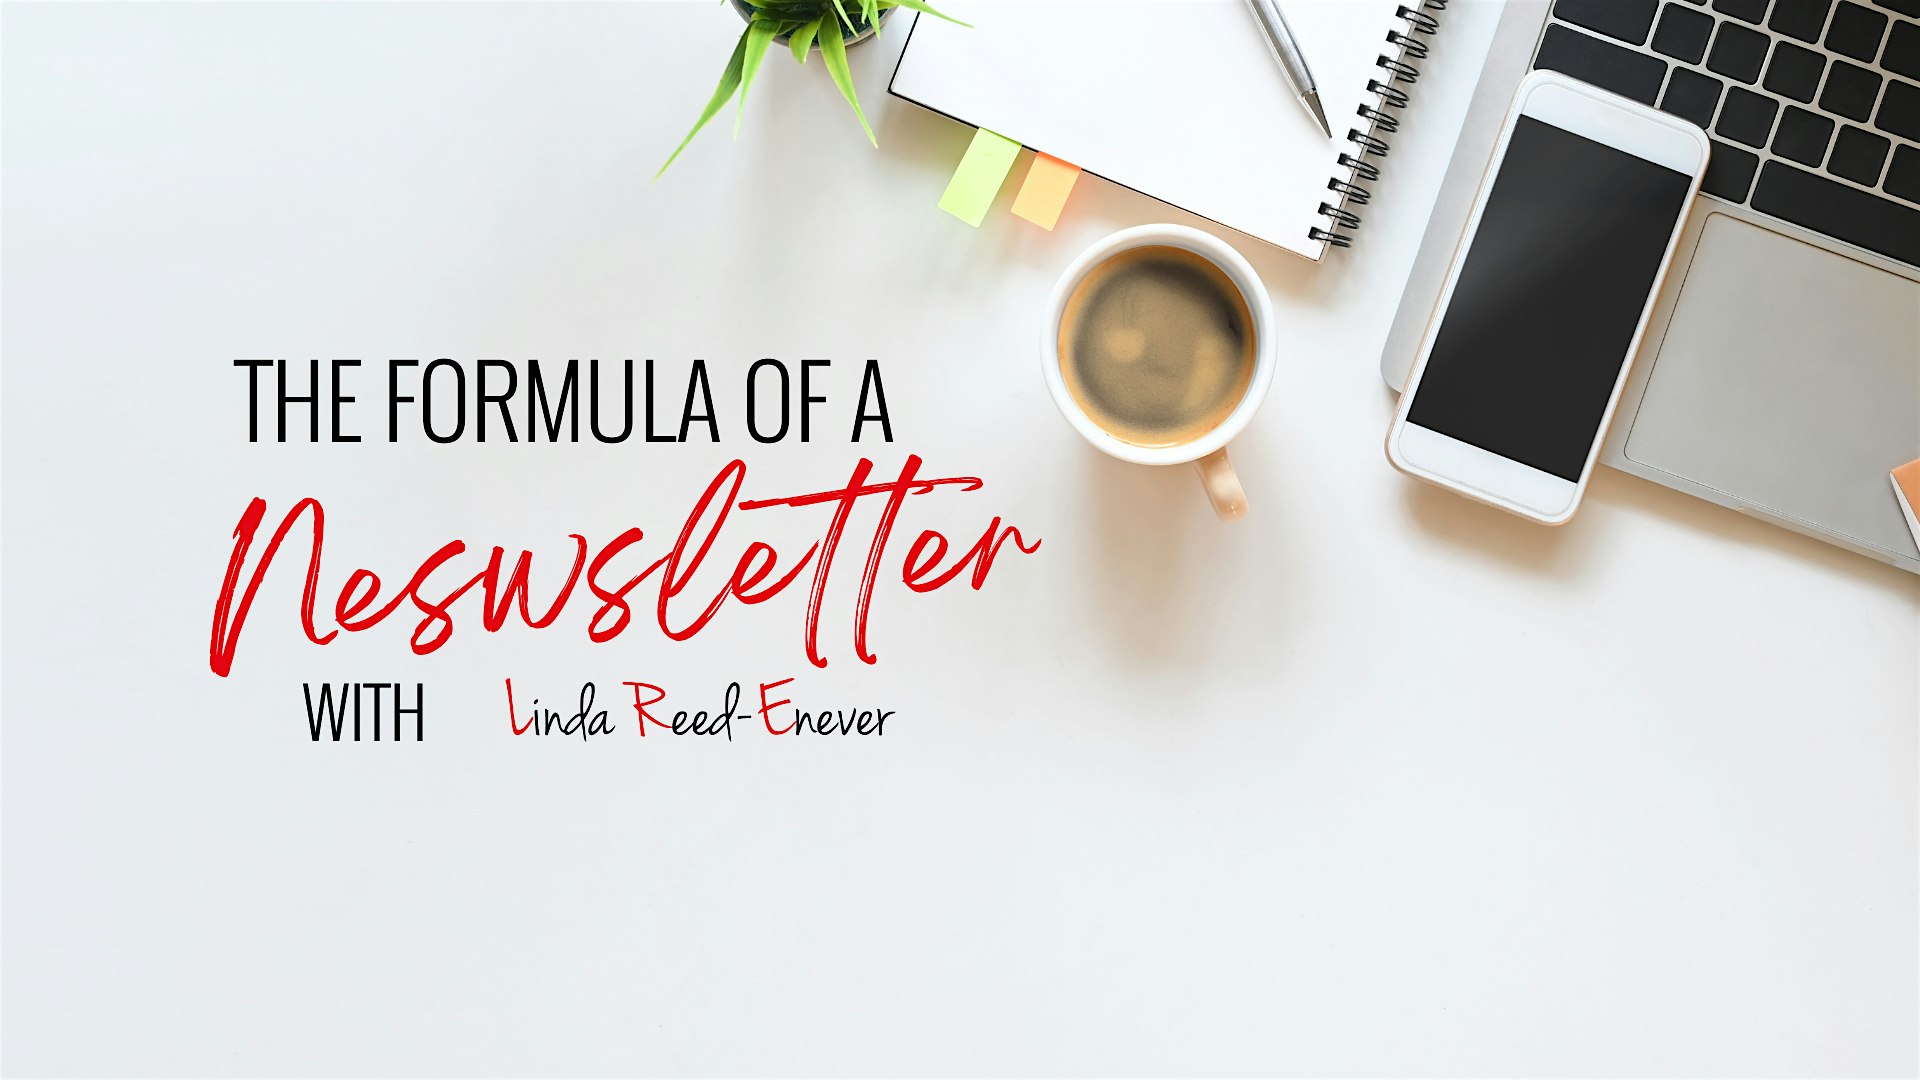 The Formula of a Newsletter